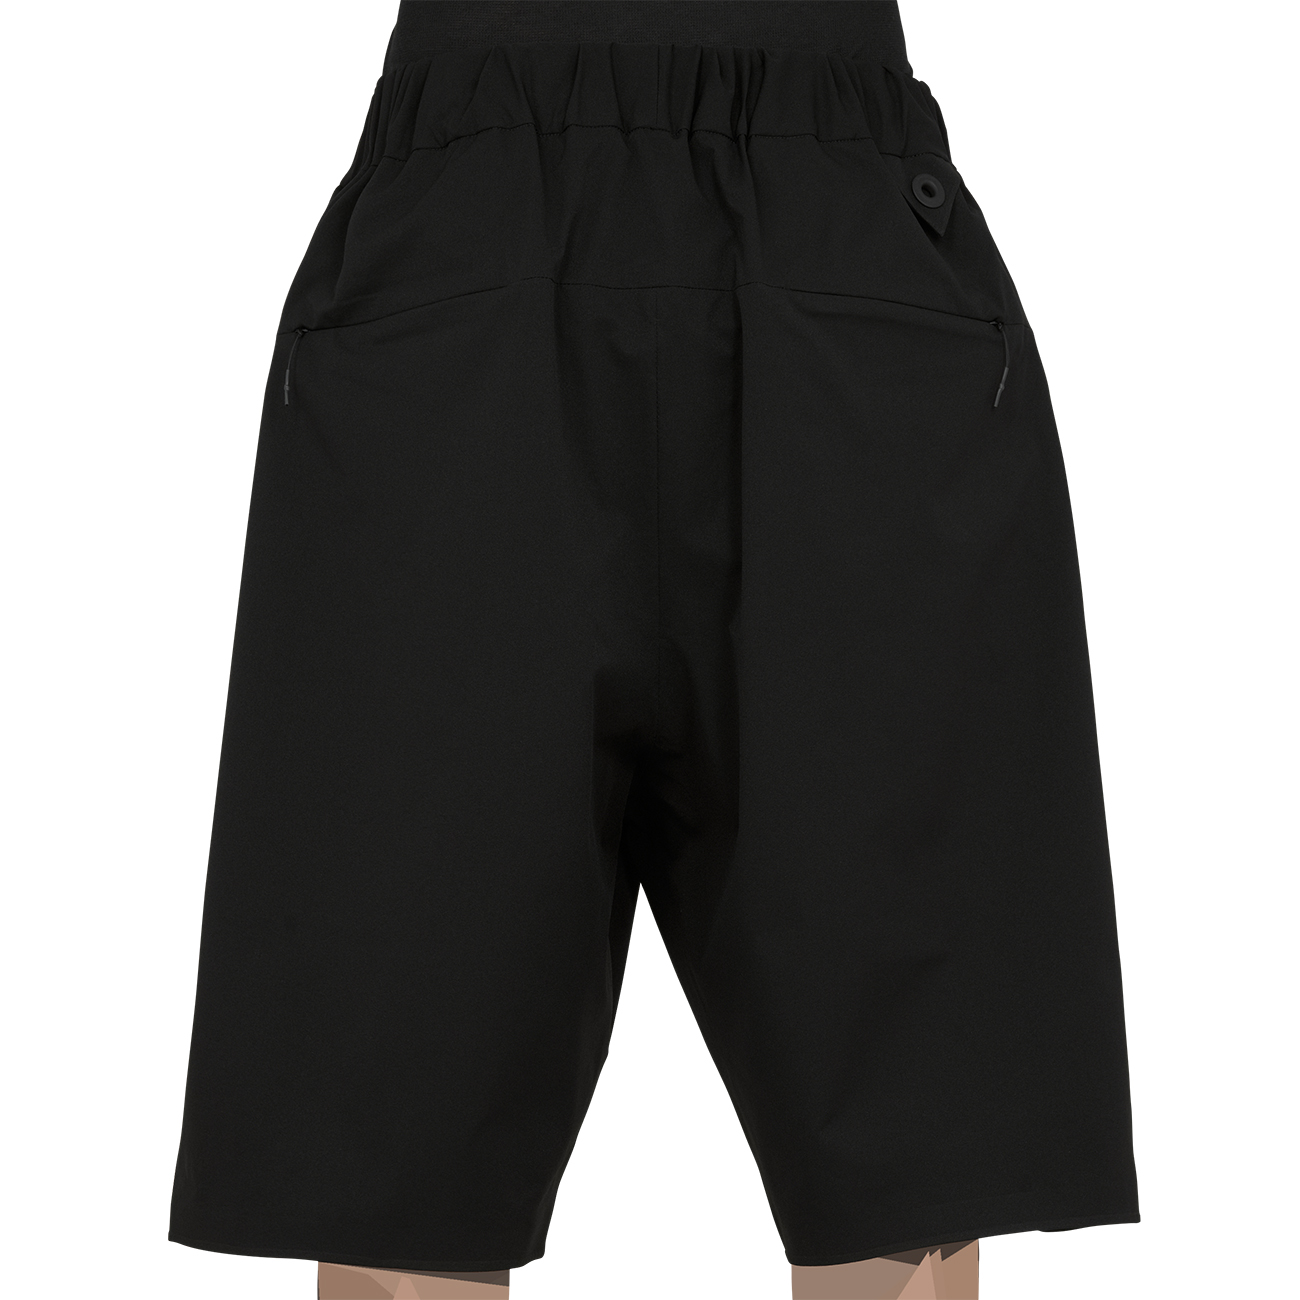 WHITE MOUNTAINEERING BLK (ホワイトマウンテニアリング ビーエルケー) - 22AW STRETCHED SARROUEL SHORTS BLACKの詳細画像6